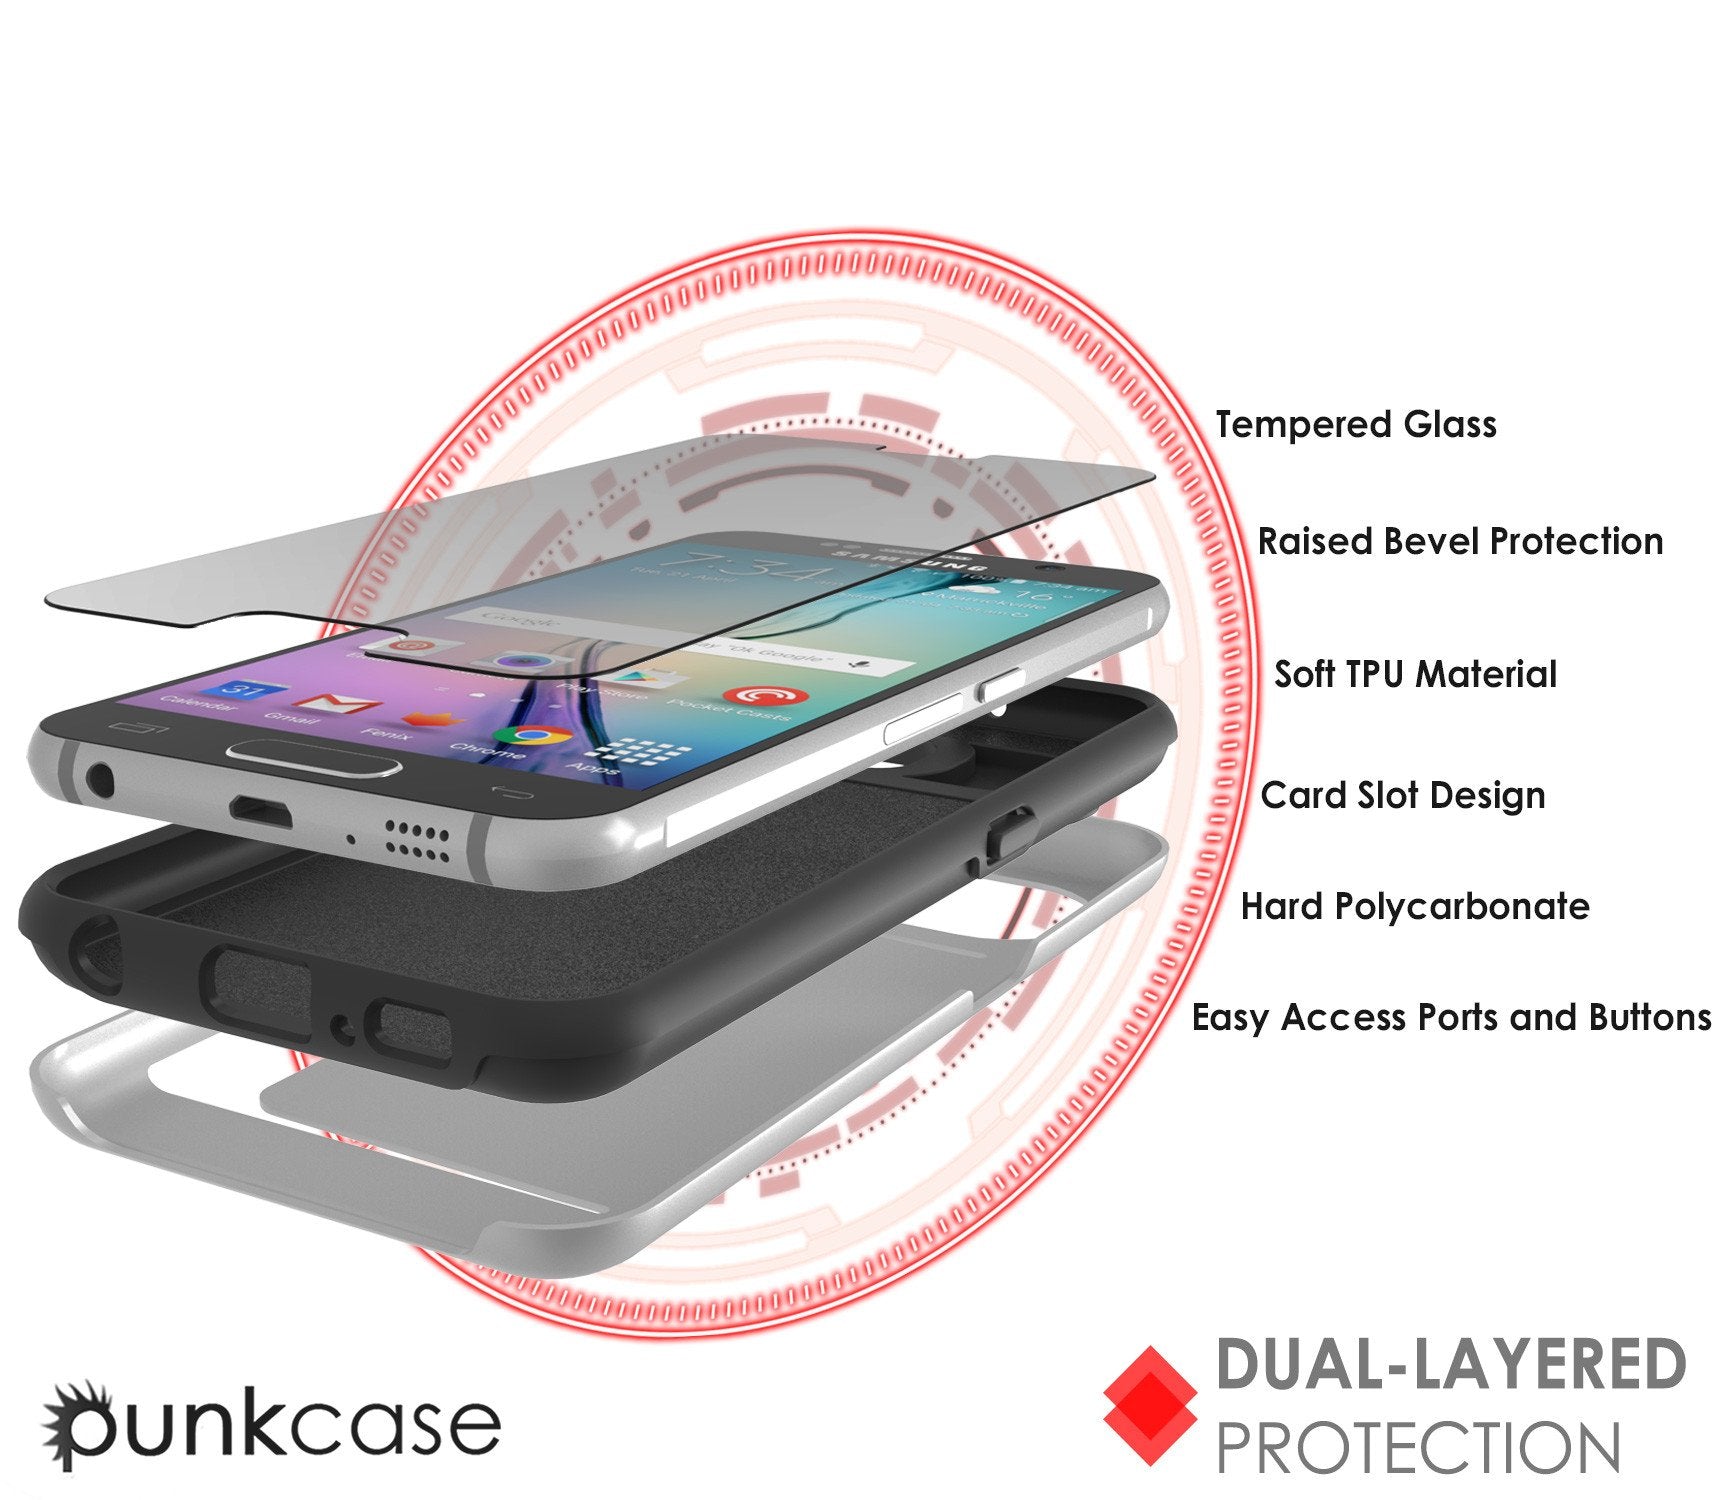 Galaxy s6 Case PunkCase CLUTCH Silver Series Slim Armor Soft Cover Case w/ Tempered Glass - PunkCase NZ